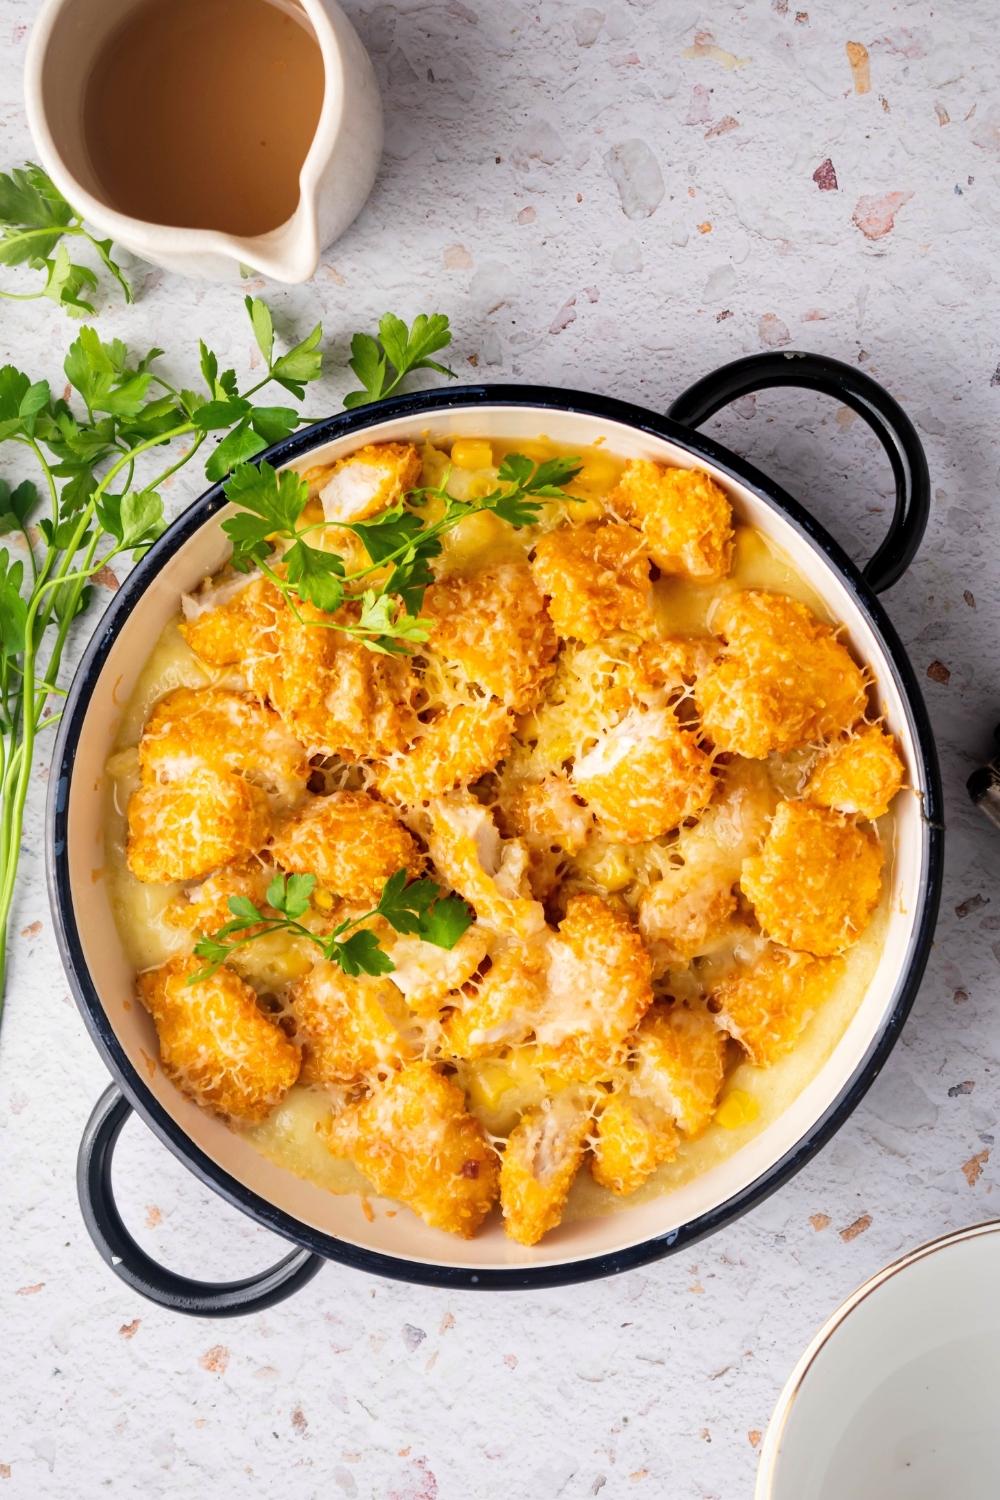 Melted shredded cheese on top of popcorn chicken and corn that is on top of mashed potatoes in a circular baking dish. Behind it is a picture of gravy and they are both on a white counter.